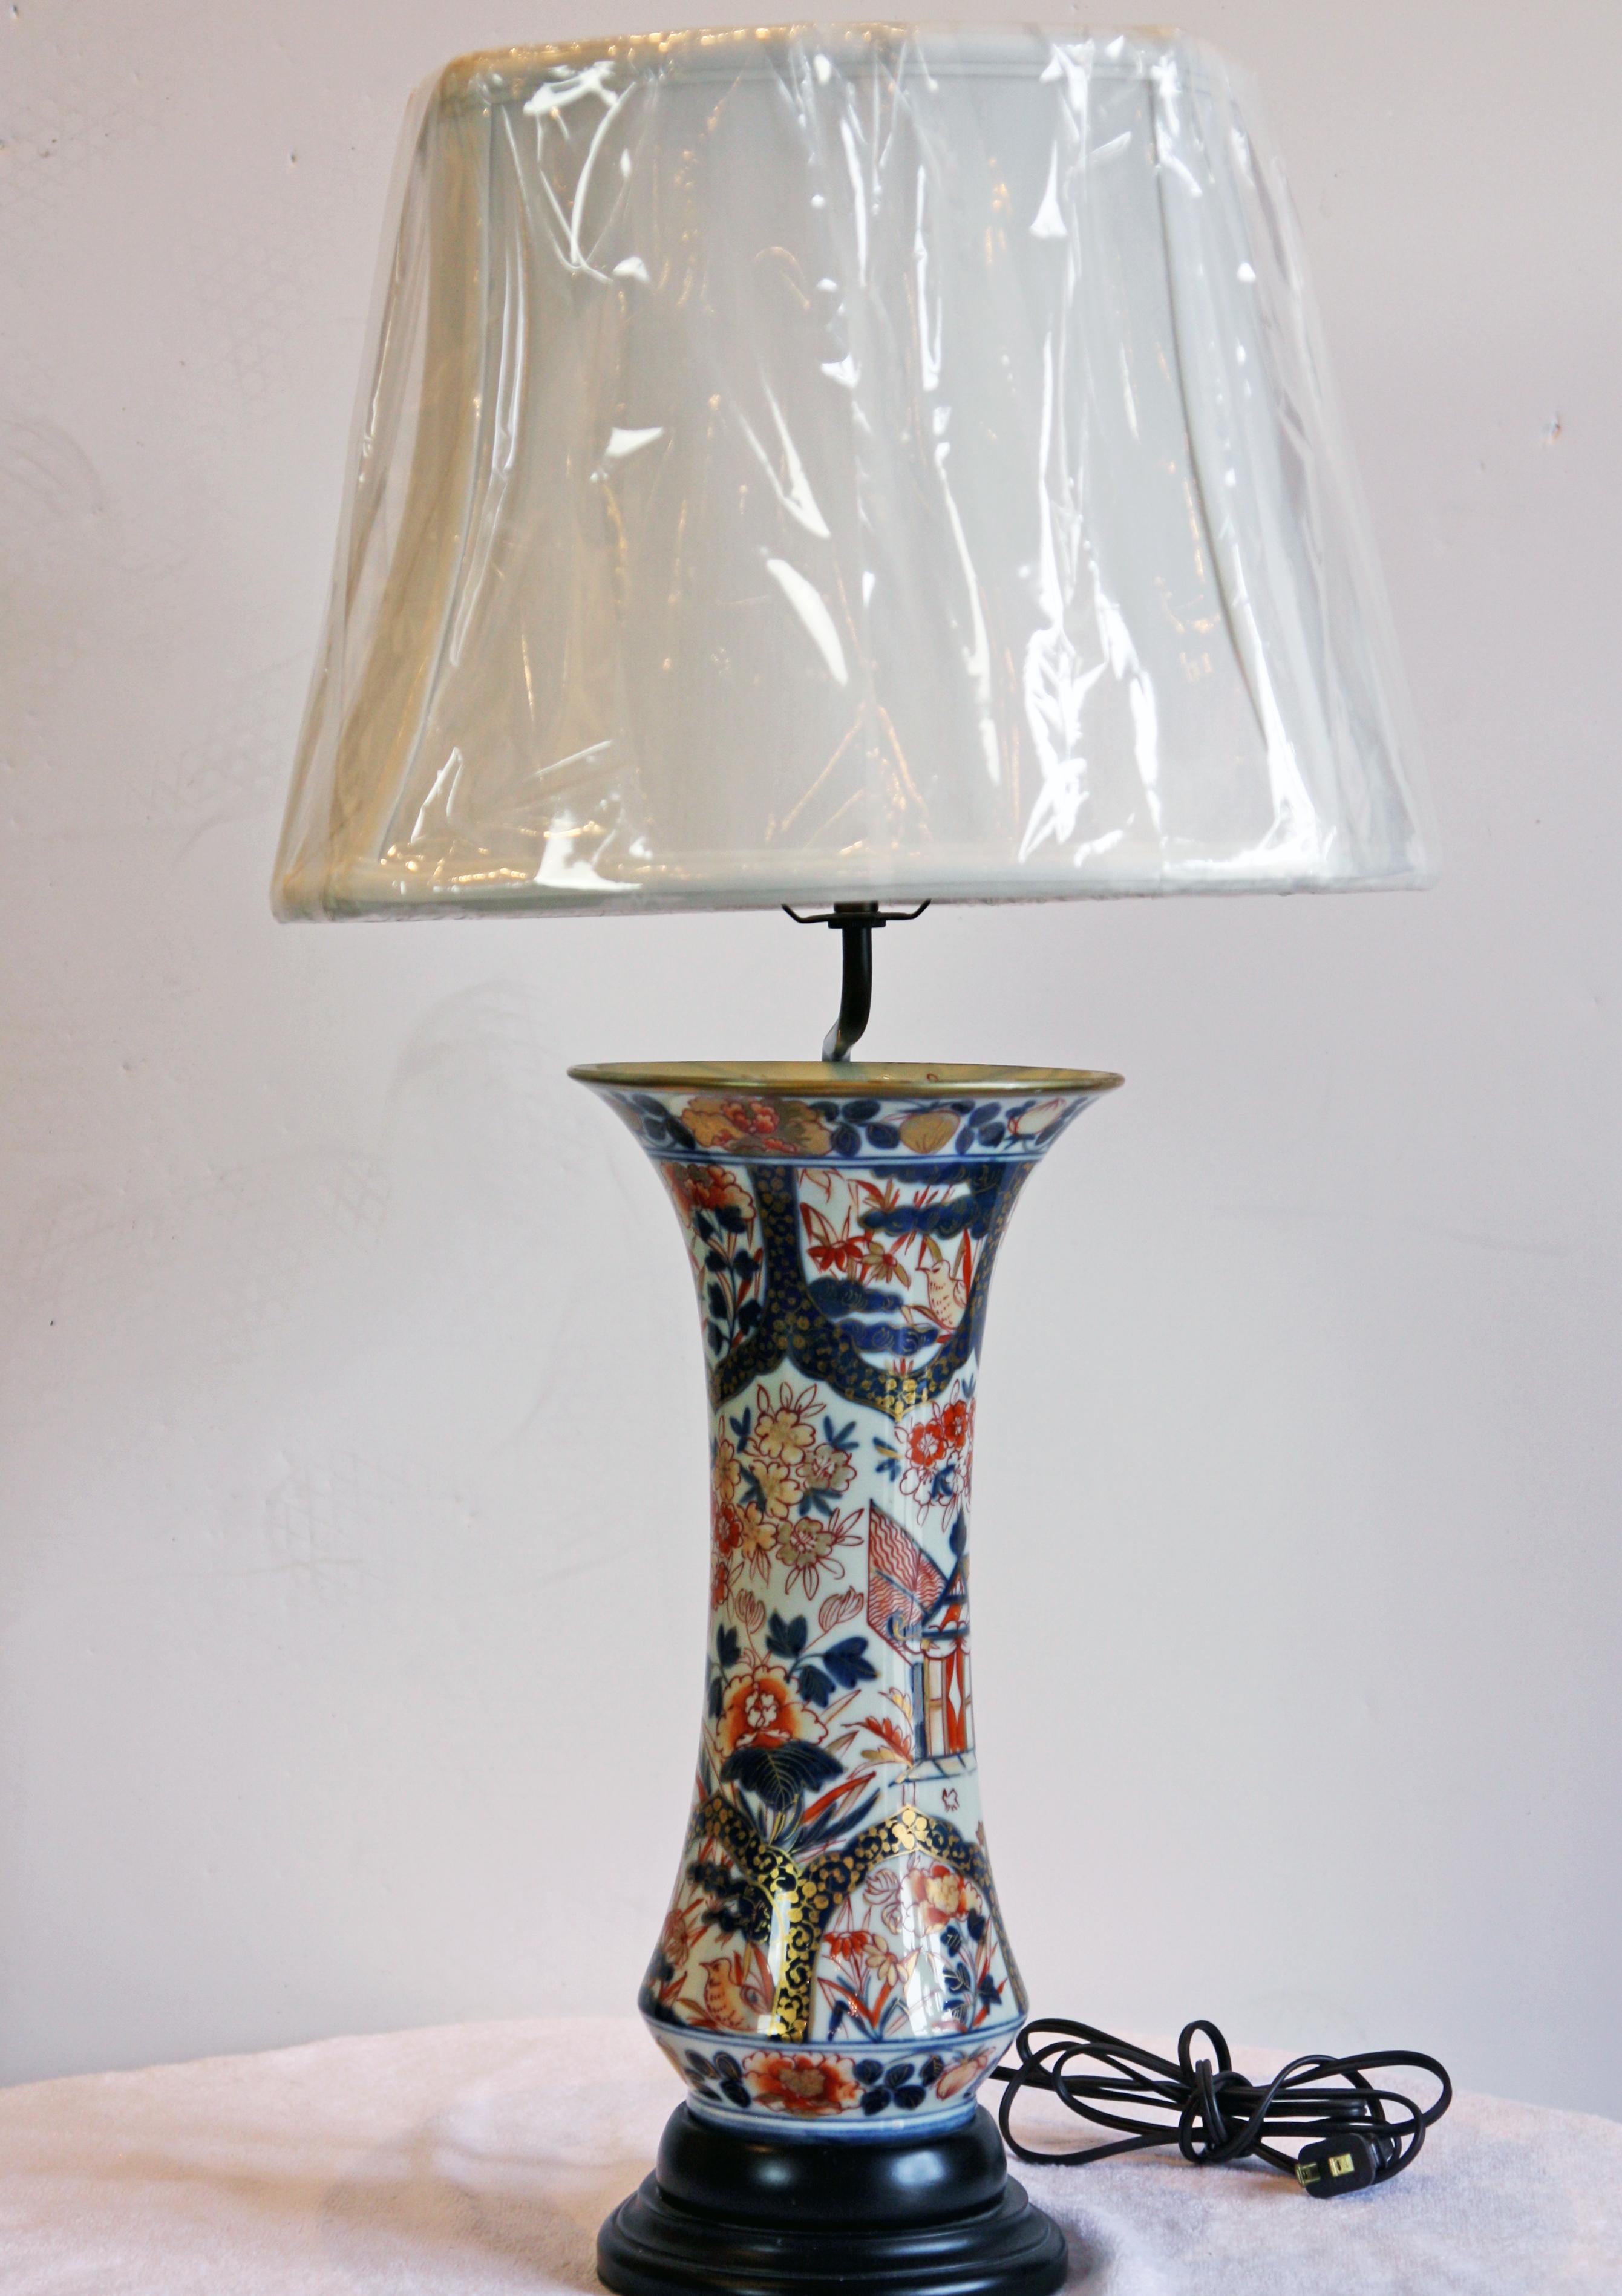 Beautiful blue, white and red Imari vase as a lamp. Hand-painted birds and flowers adorn the piece. The vase is not drilled and is removable from the lamp stand. Shade is included.